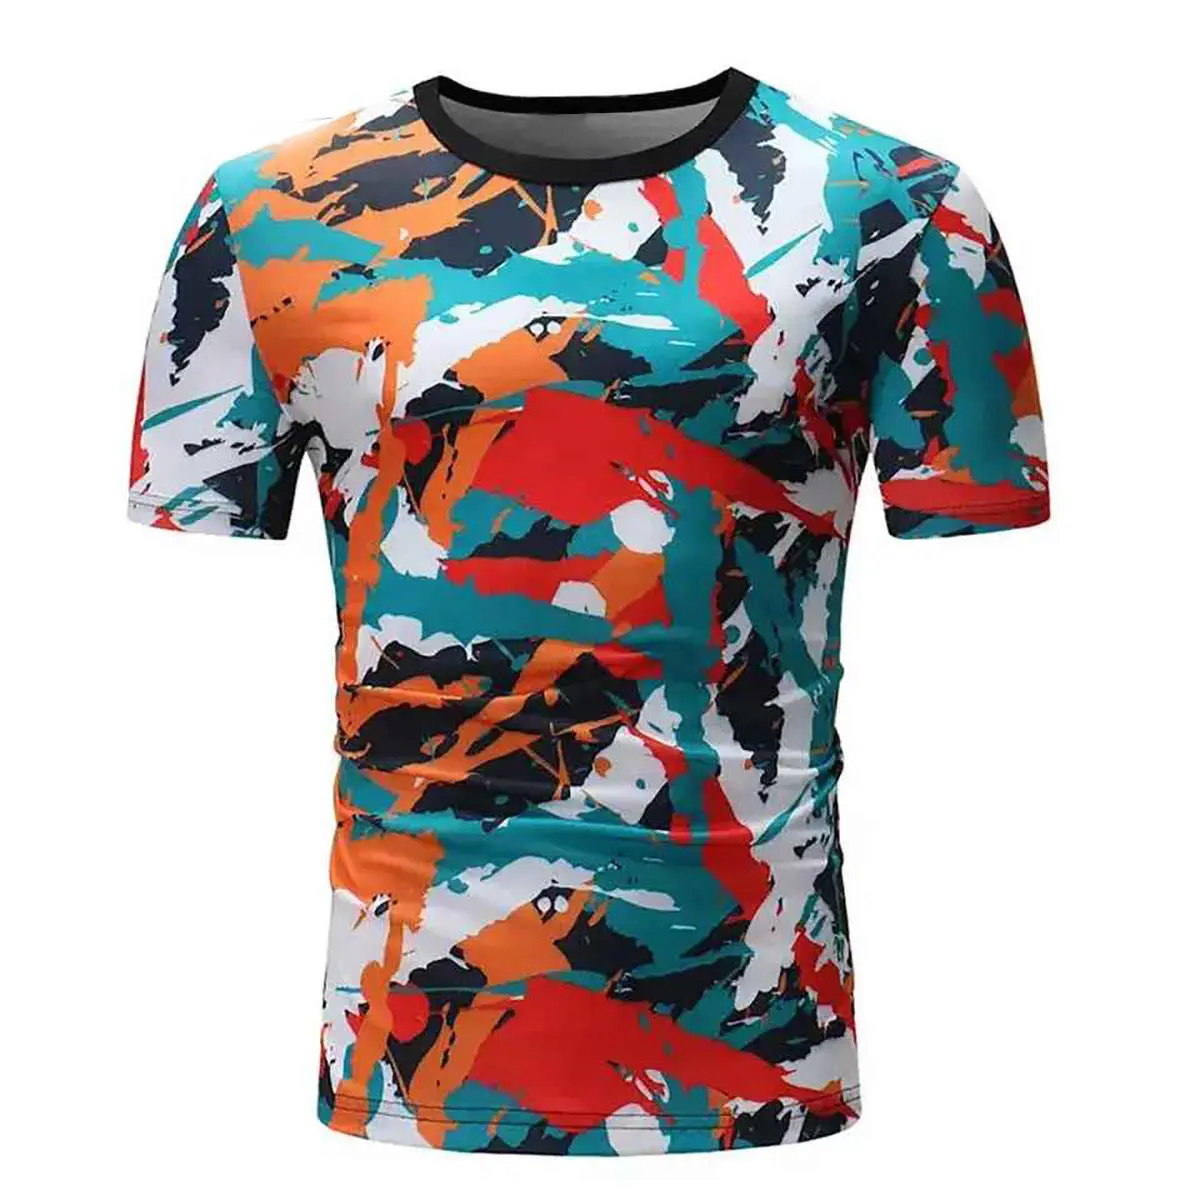 Short Sleeve T Shirts Sublimation Printing Clothes Men Fashionable High Quality T Shirts For Men's Fabric t shirts top supplier